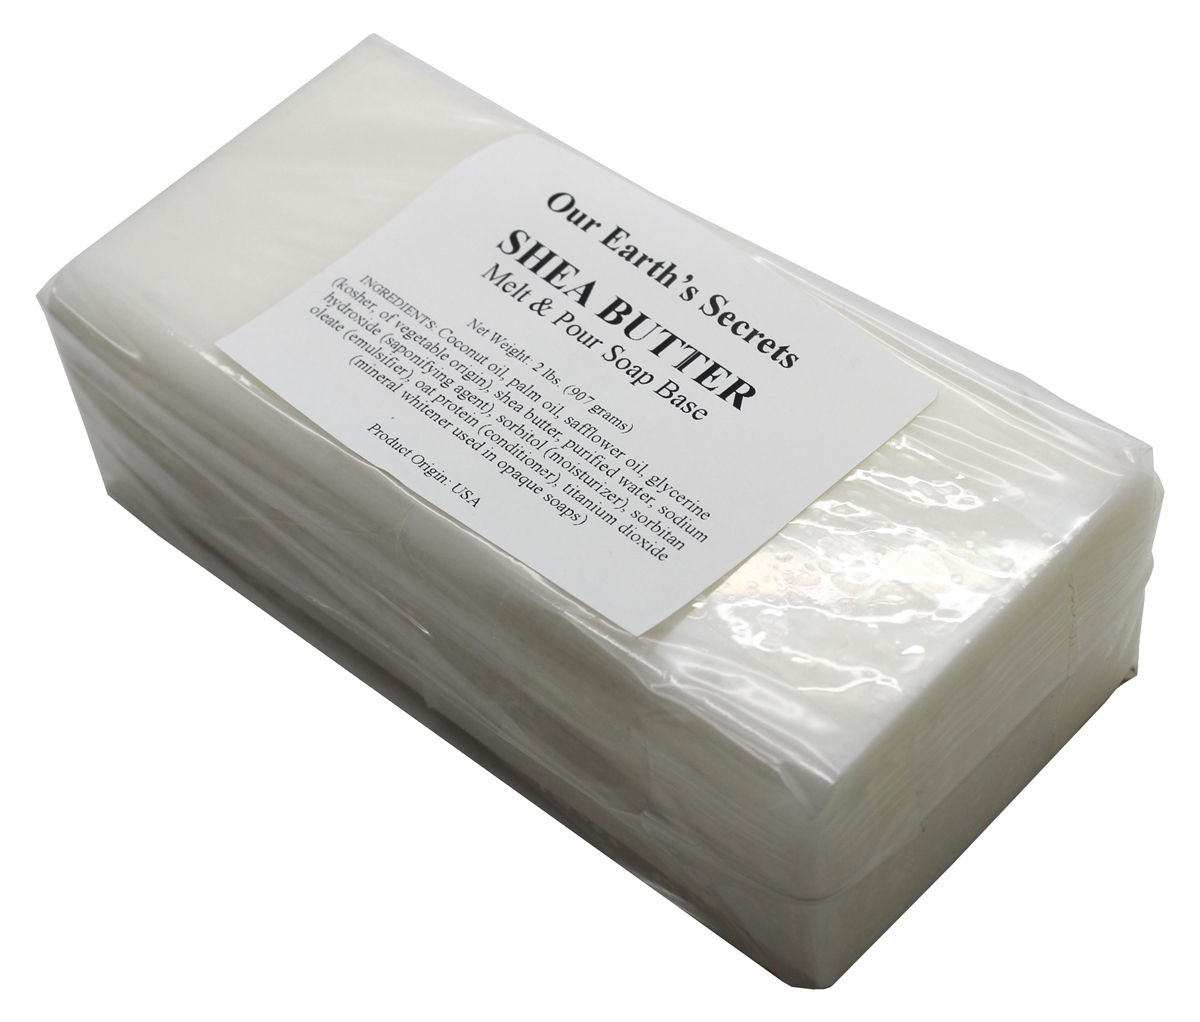 Our Earth's Secrets 2 Lbs (907 grams) Shea Butter Melt and Pour